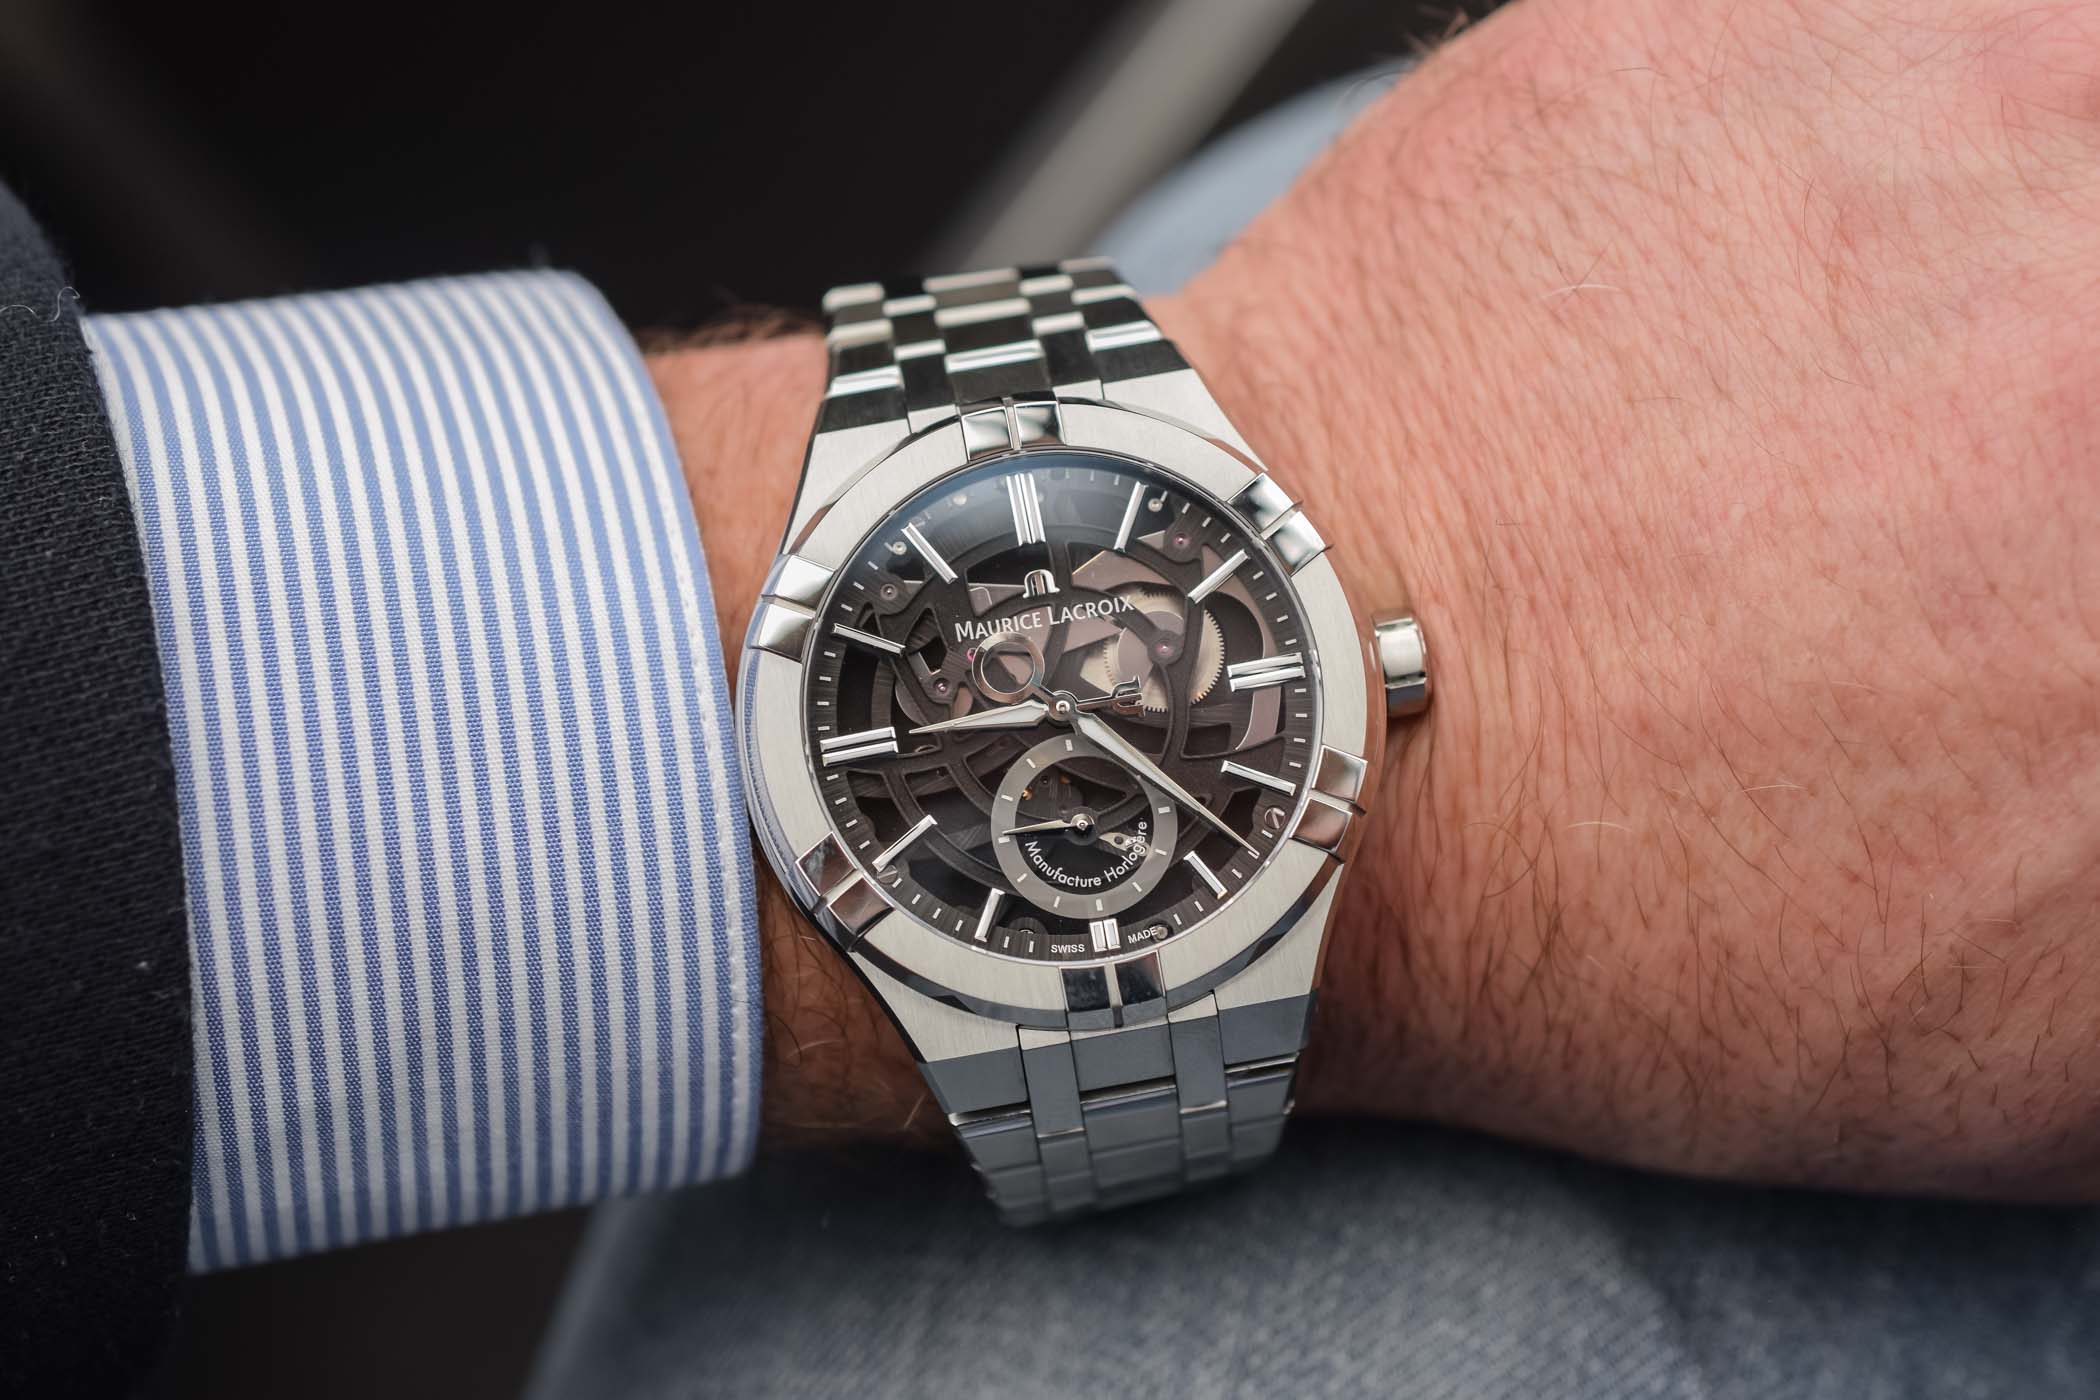 VIDEO - Discovering the Maurice Lacroix Aikon Mercury with Patented Free-Hand Display